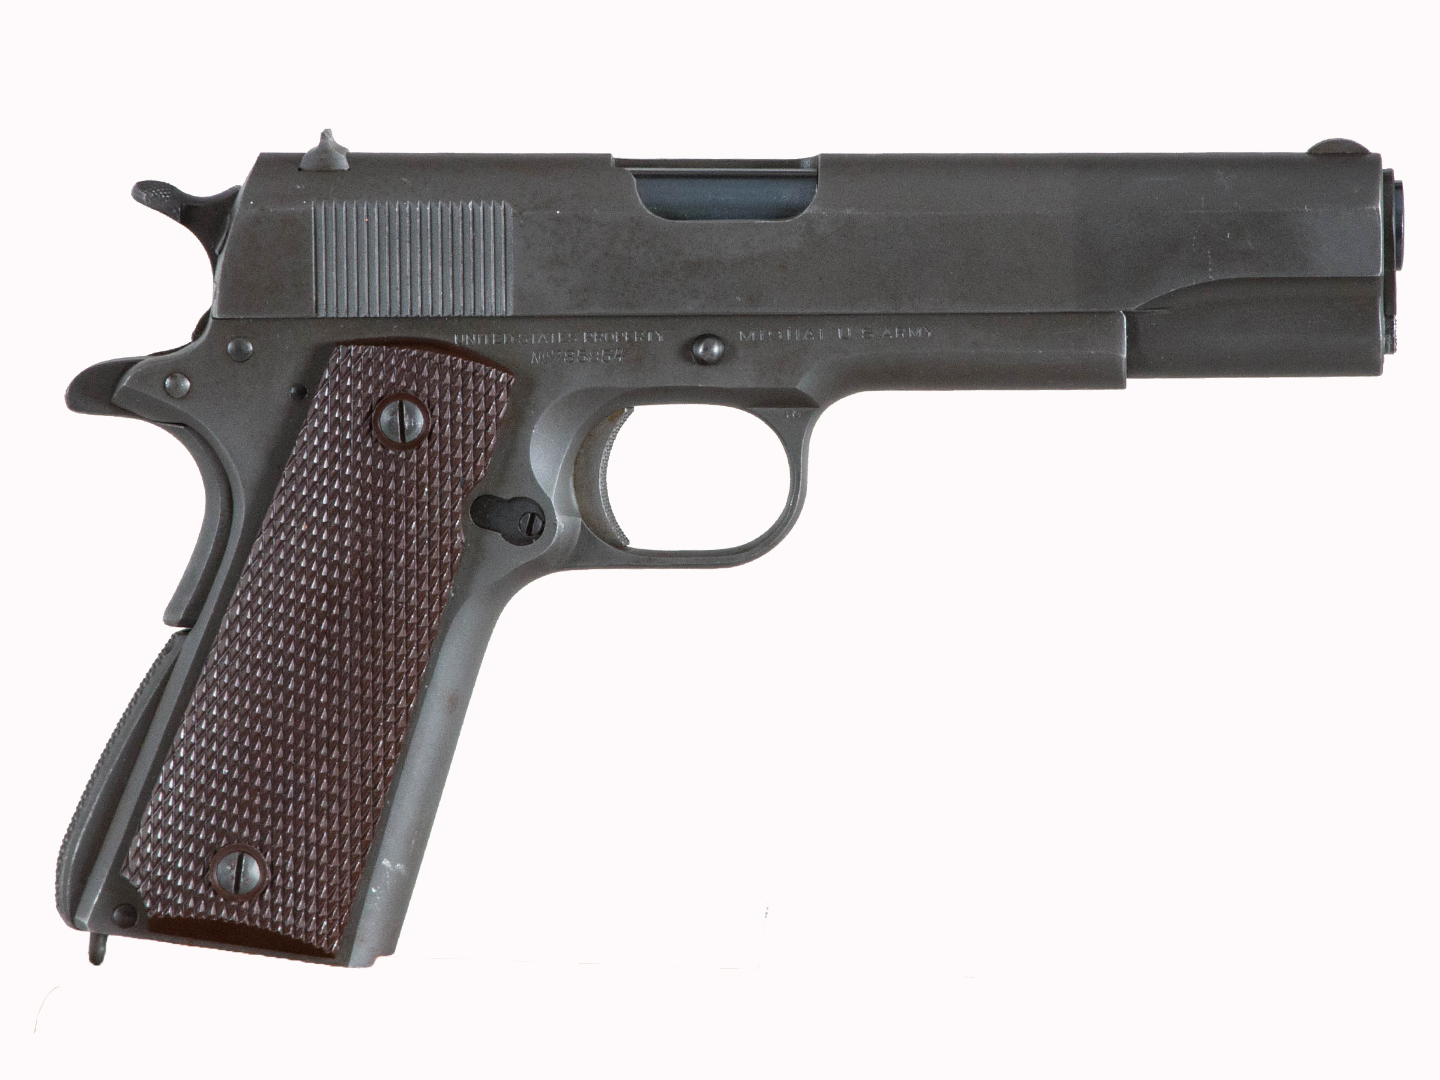 RS-full-colt-1911-a1-parkerized-5297.jpg